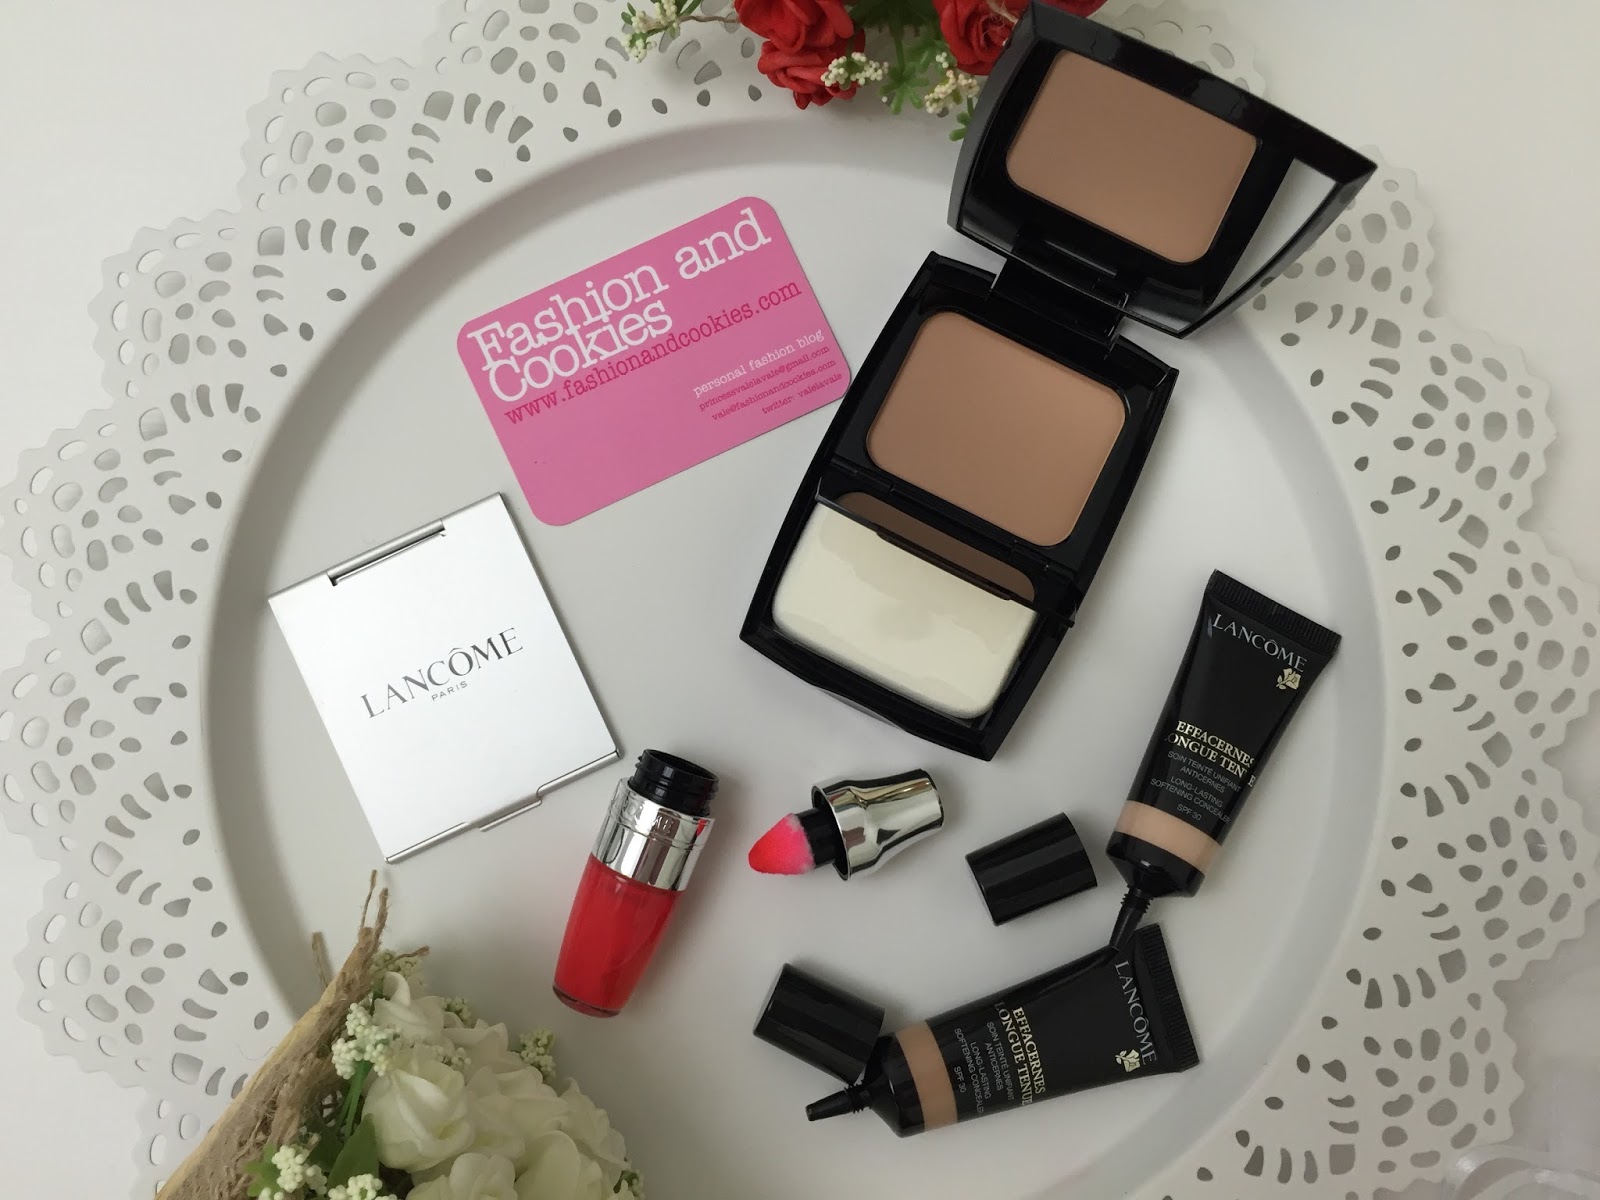 Lancôme Effacernes Longue Tenue concealer and the brand new Teint Idole Ultra Compact foundation review on Fashion and Cookies beauty blog, beauty blogger